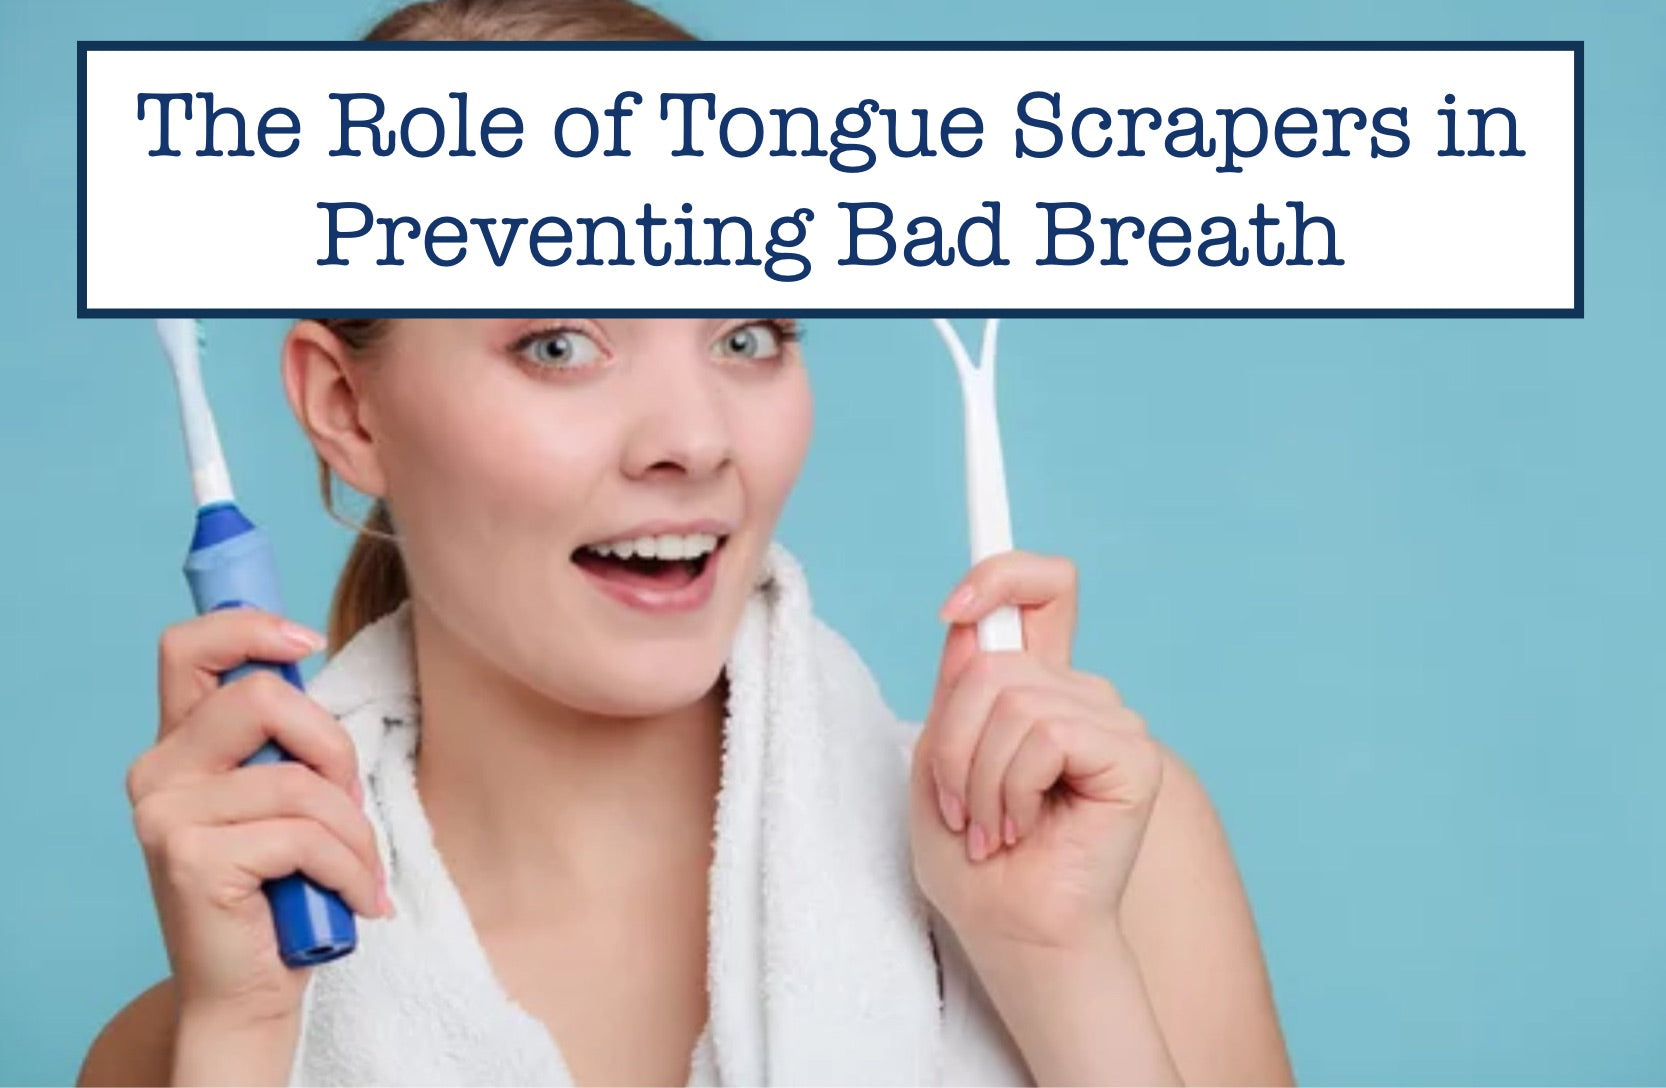 The Role of Tongue Scrapers in Preventing Bad Breath